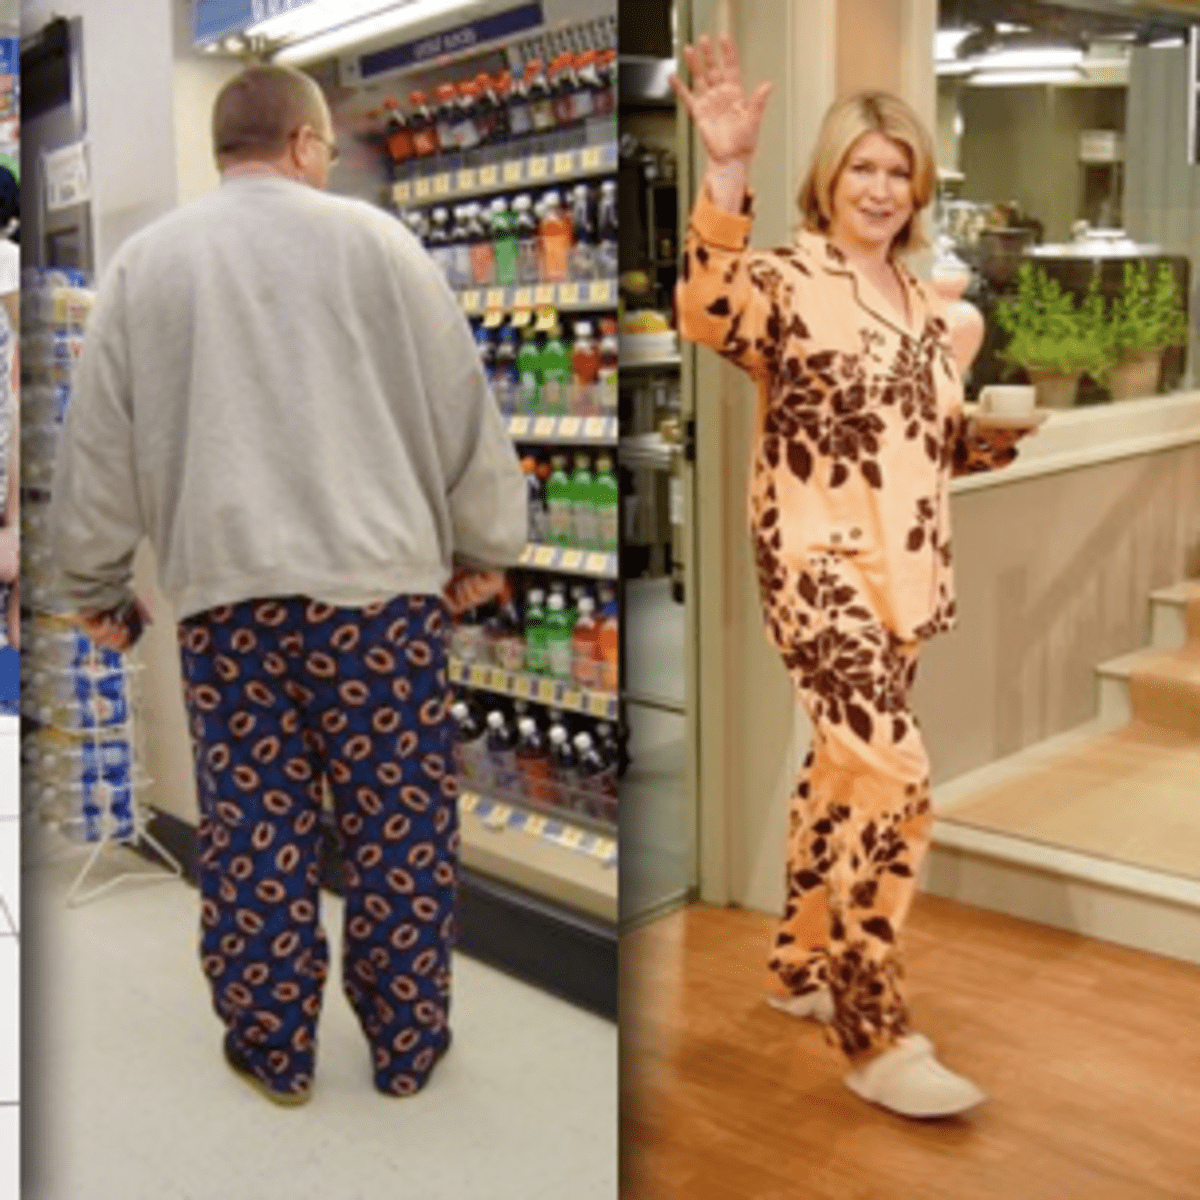 Why Wear Pajamas in Public? - HubPages